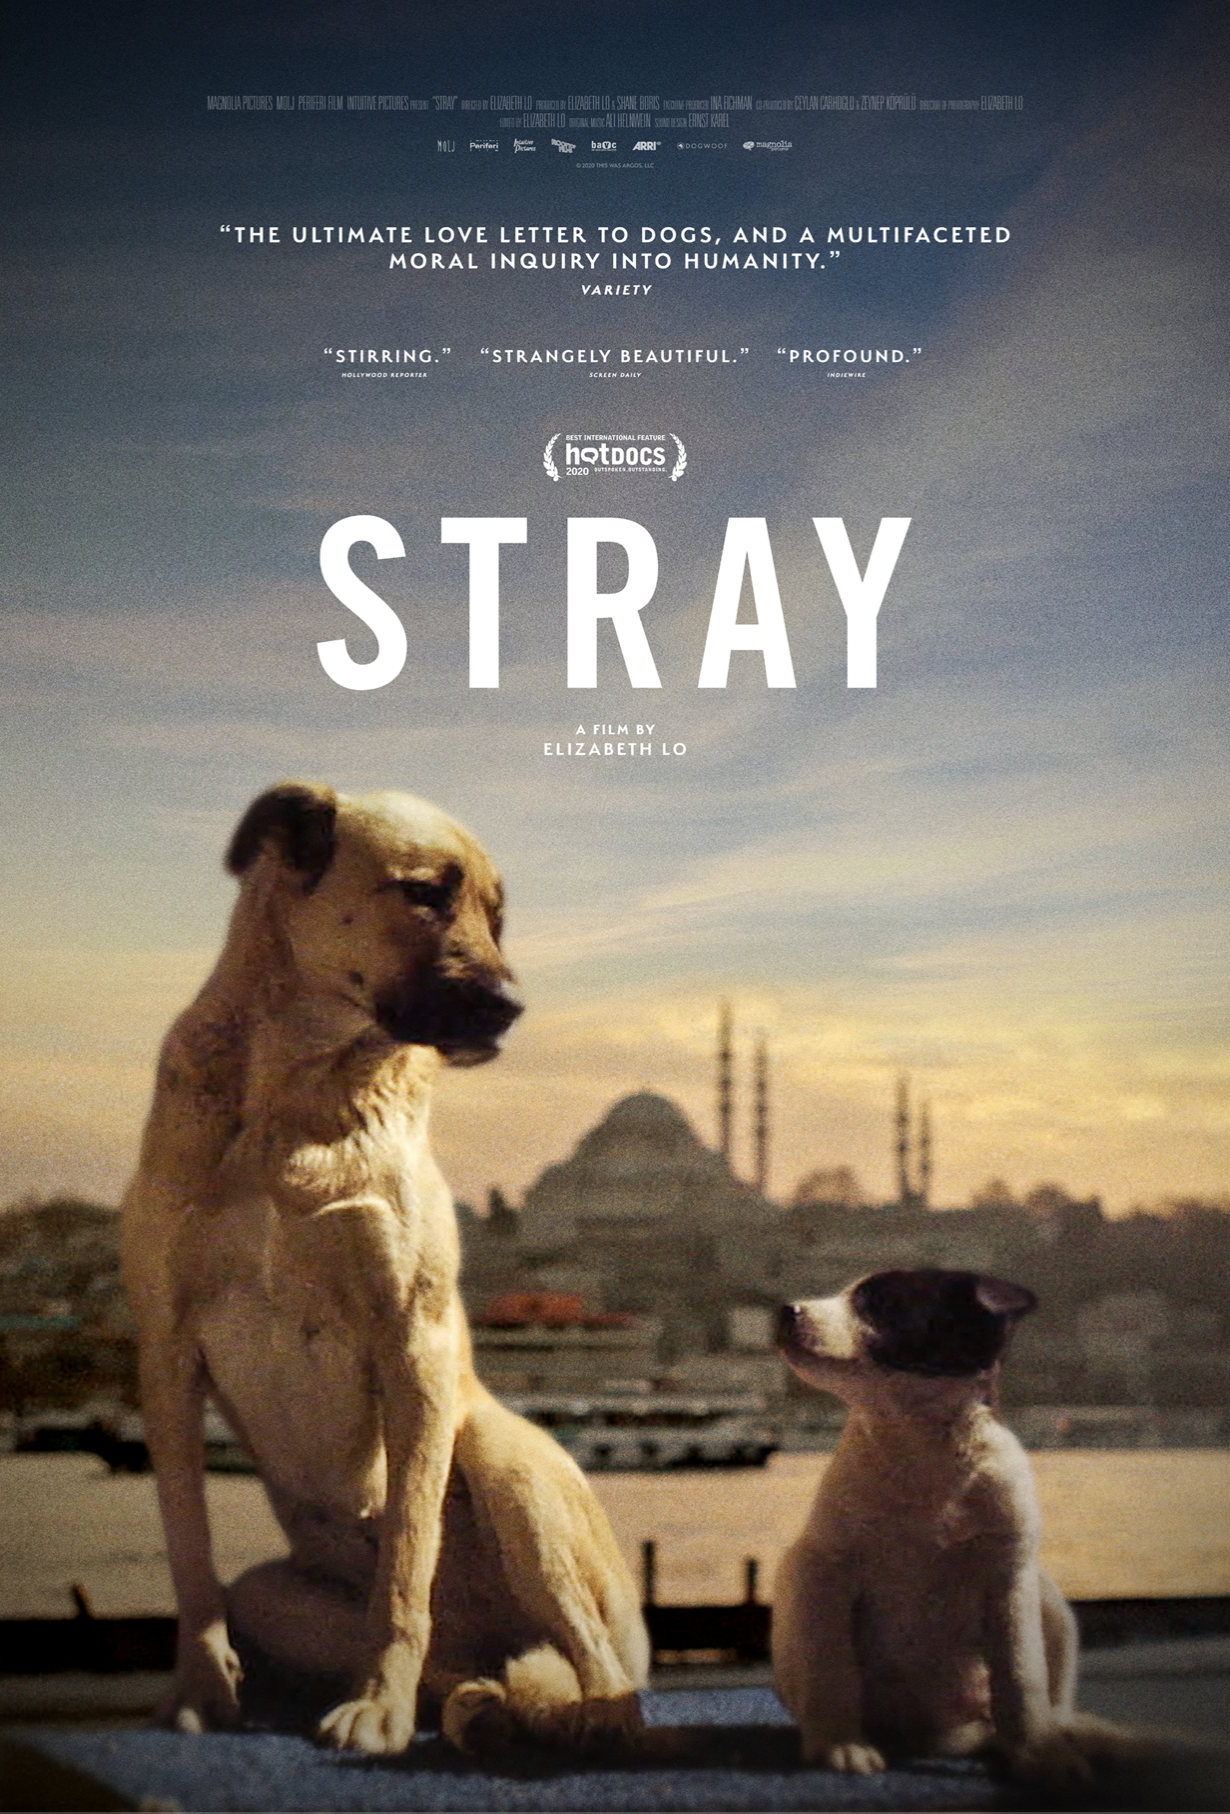 Elizabeth Lo Shows Us A Narrative Of A Stray In Her New Documentary [Exclusive Interview]